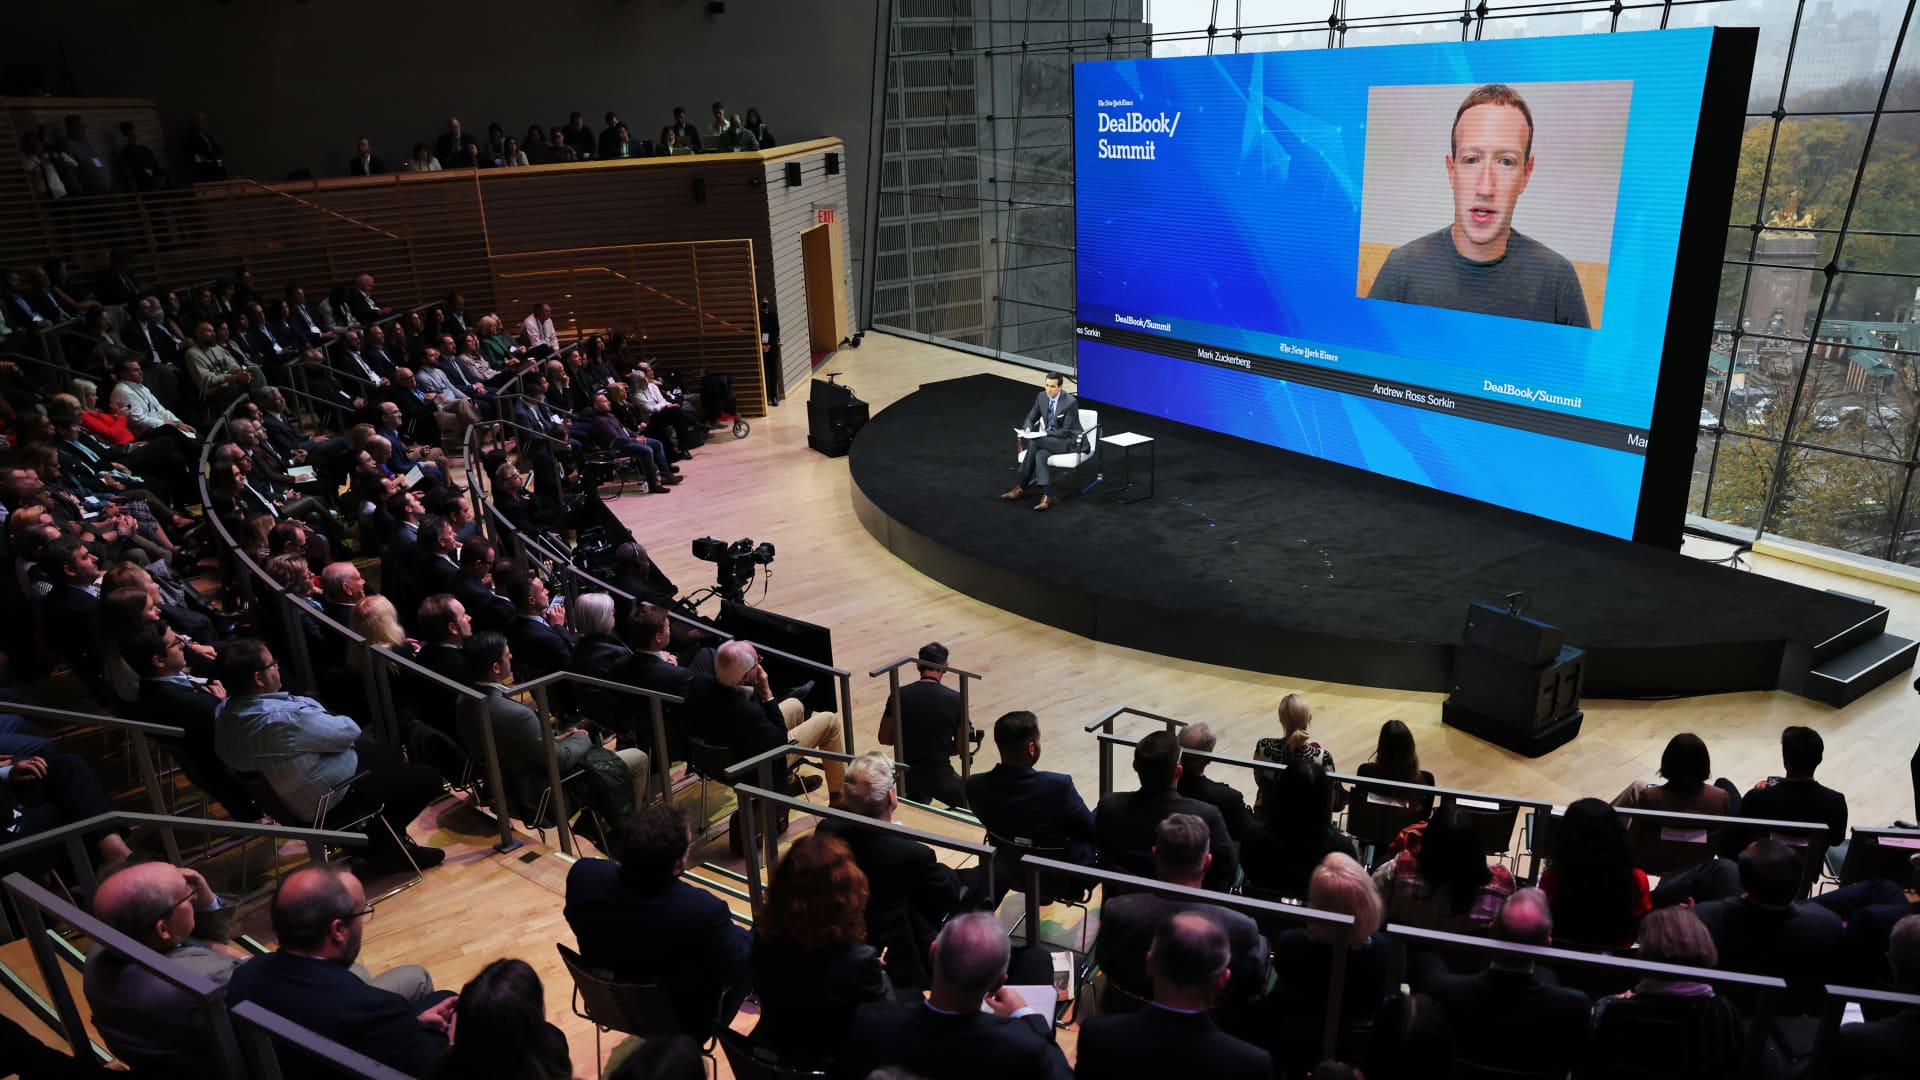 Andrew Ross Sorkin speaks with Meta CEO and founder Mark Zuckerberg during the New York Times DealBook Summit in the Appel Room at the Jazz At Lincoln Center on November 30, 2022 in New York City.